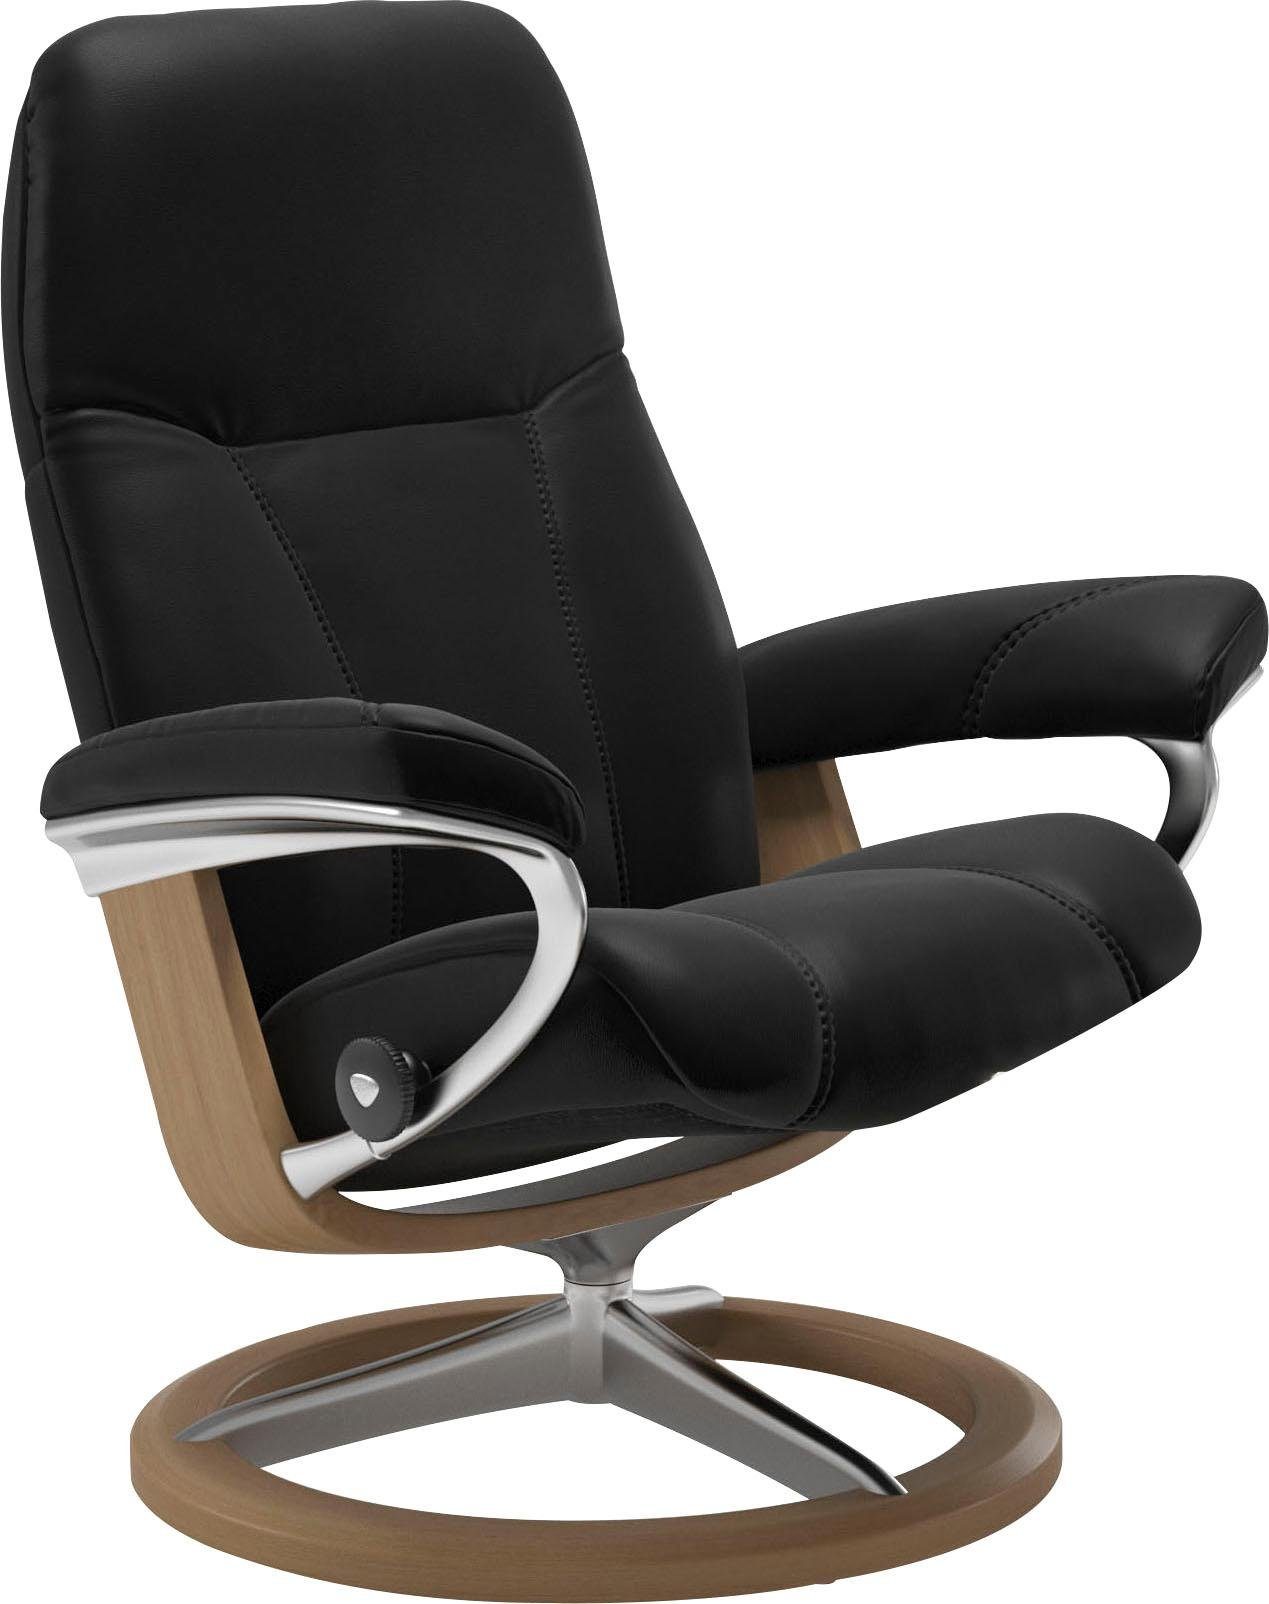 Stressless® Relaxsessel Consul, mit Signature Base, Größe S, Gestell Eiche | Funktionssessel